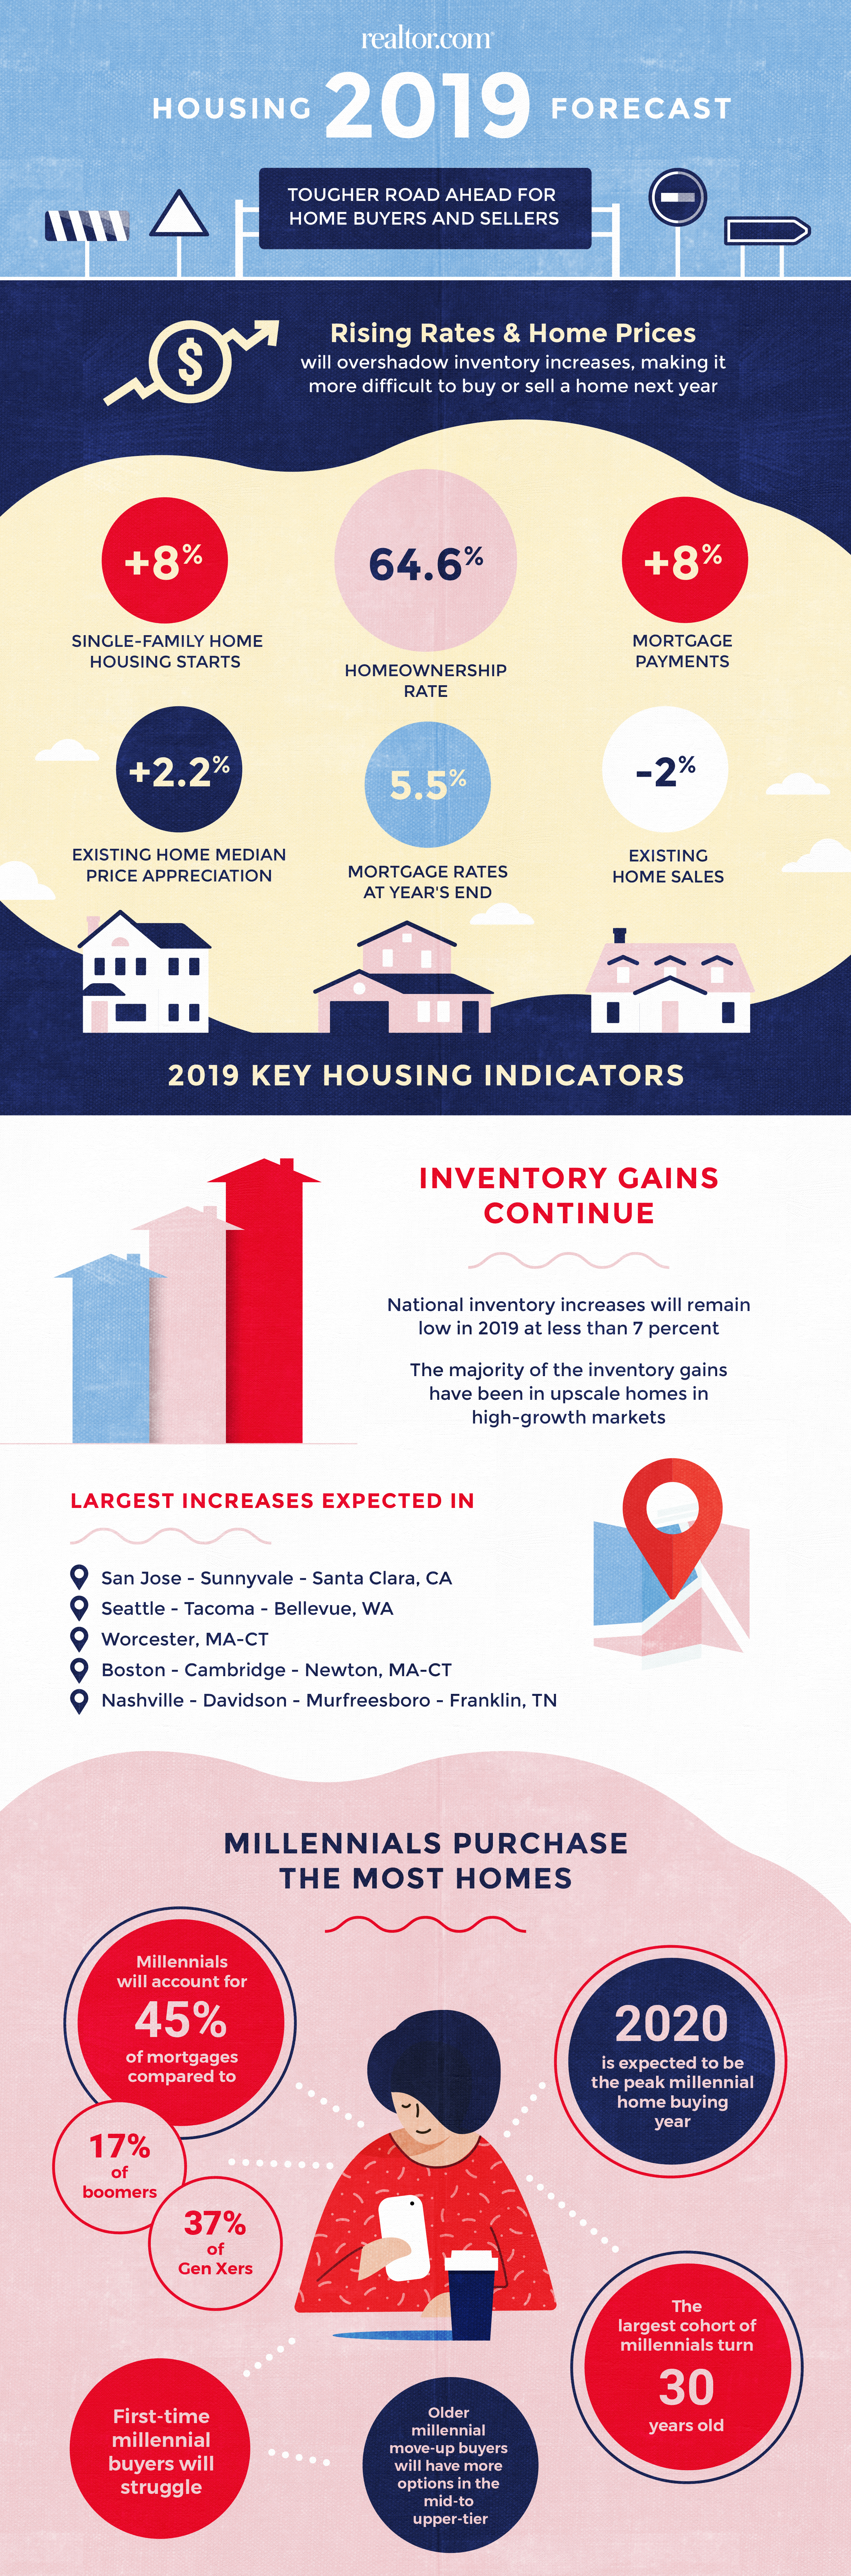 Real Estate and Housing Forecast for 2019 infographic by Realtor.com